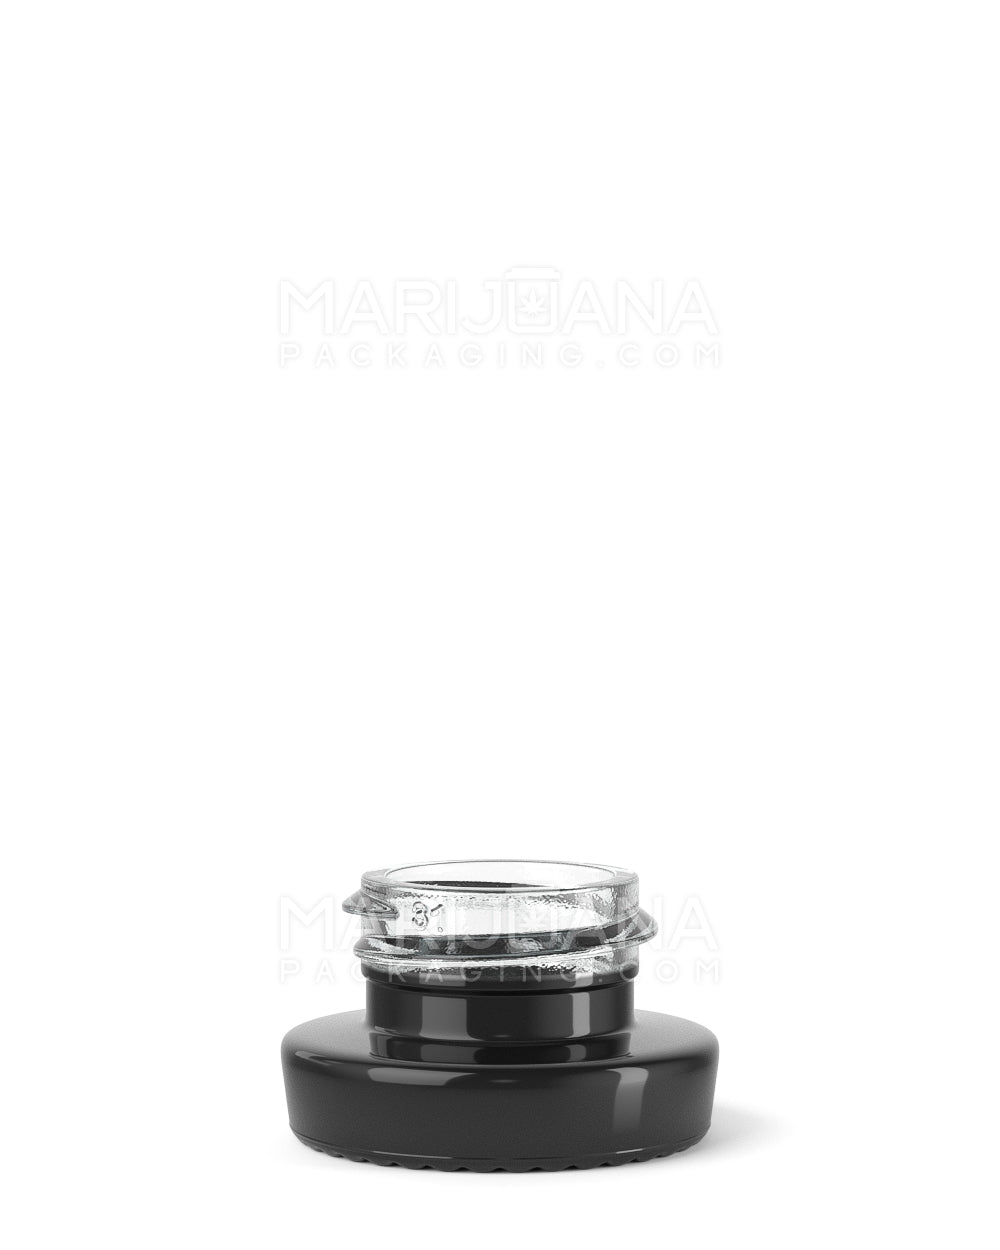 Black Glass Concentrate Containers / Silver Interior 28mm - 5mL - 480 Count | Sample